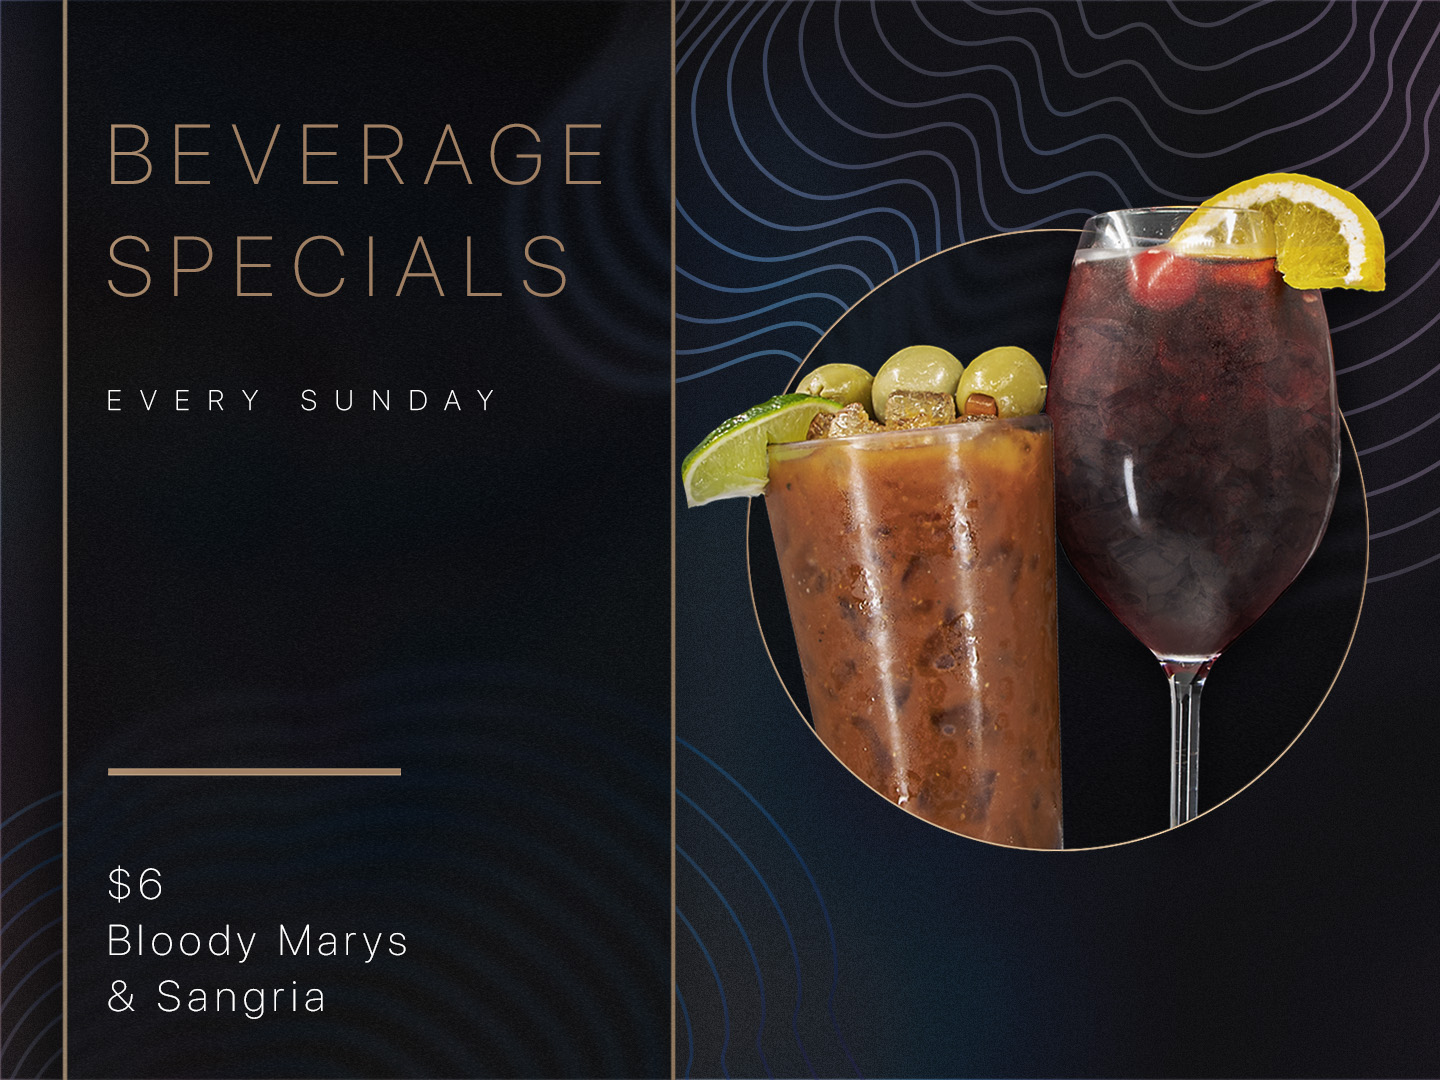 Beverage Specials. Every Sunday. $6 Bloody Marys & Sangria